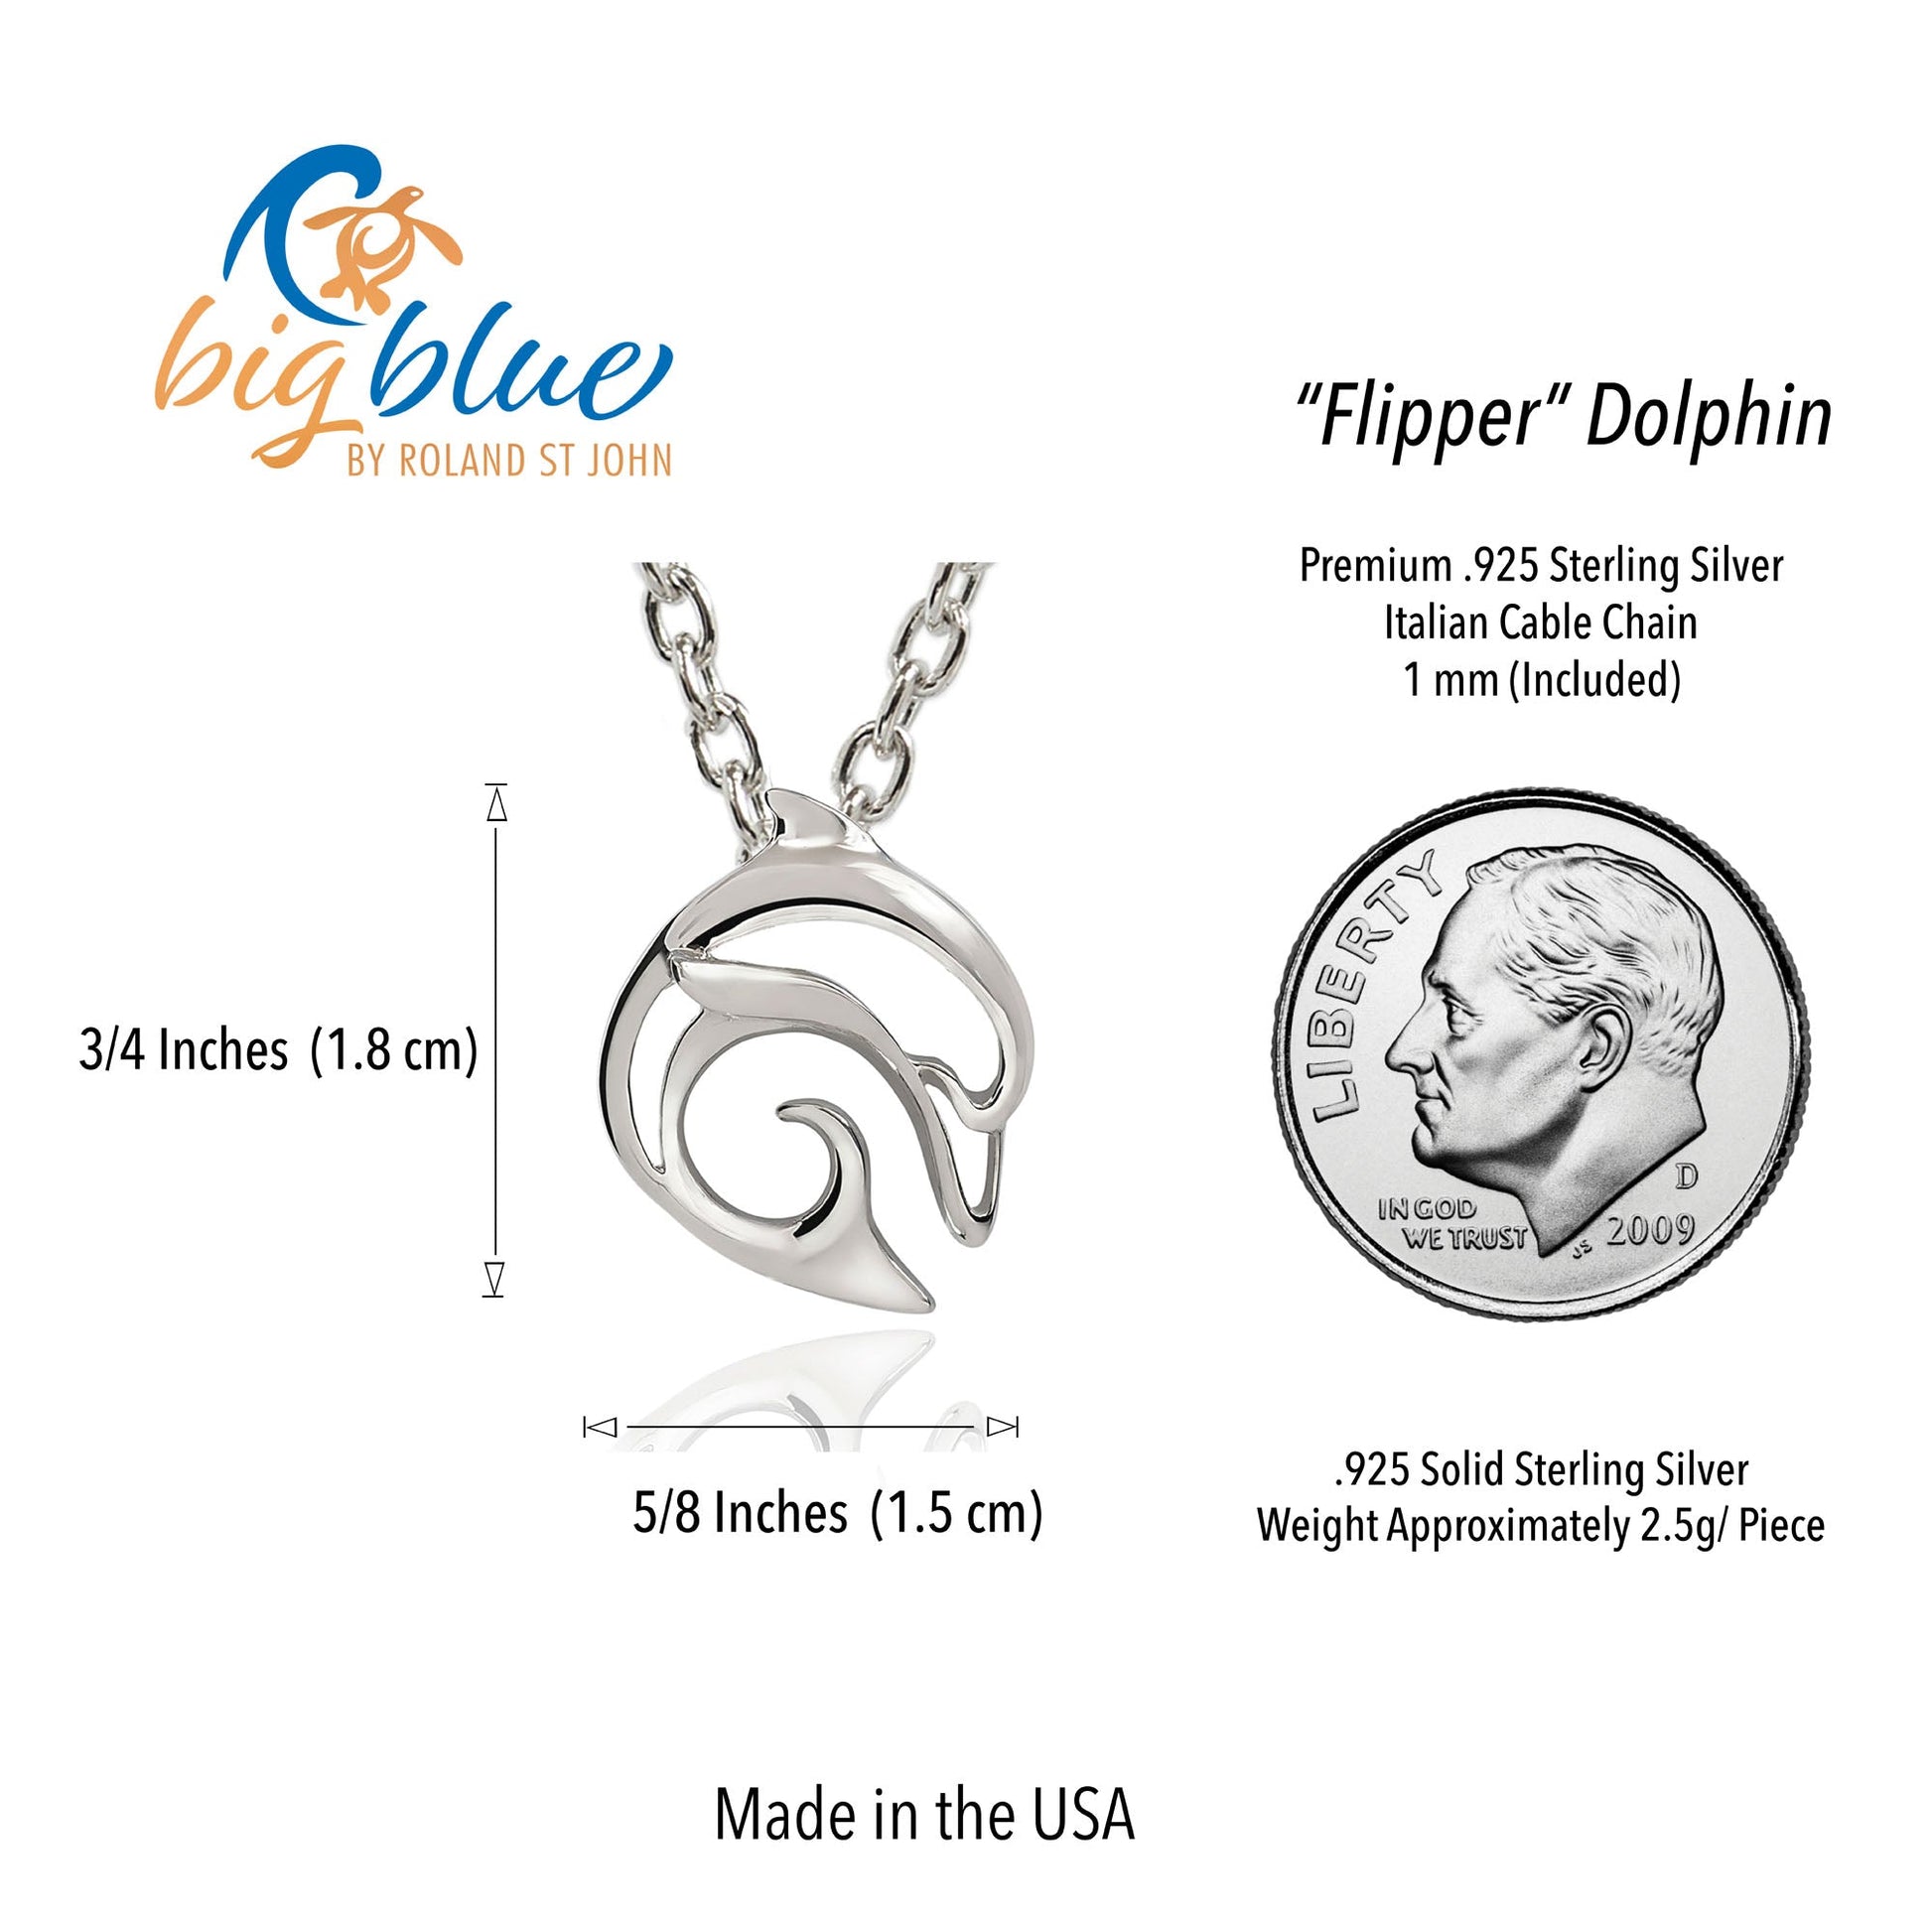 Dolphin Necklace Sterling Silver for Women- Dolphin Gifts for Women, Dolphin Jewelry, Miniature Dolphin Charms, Gifts for Dolphin Lovers - The Tool Store